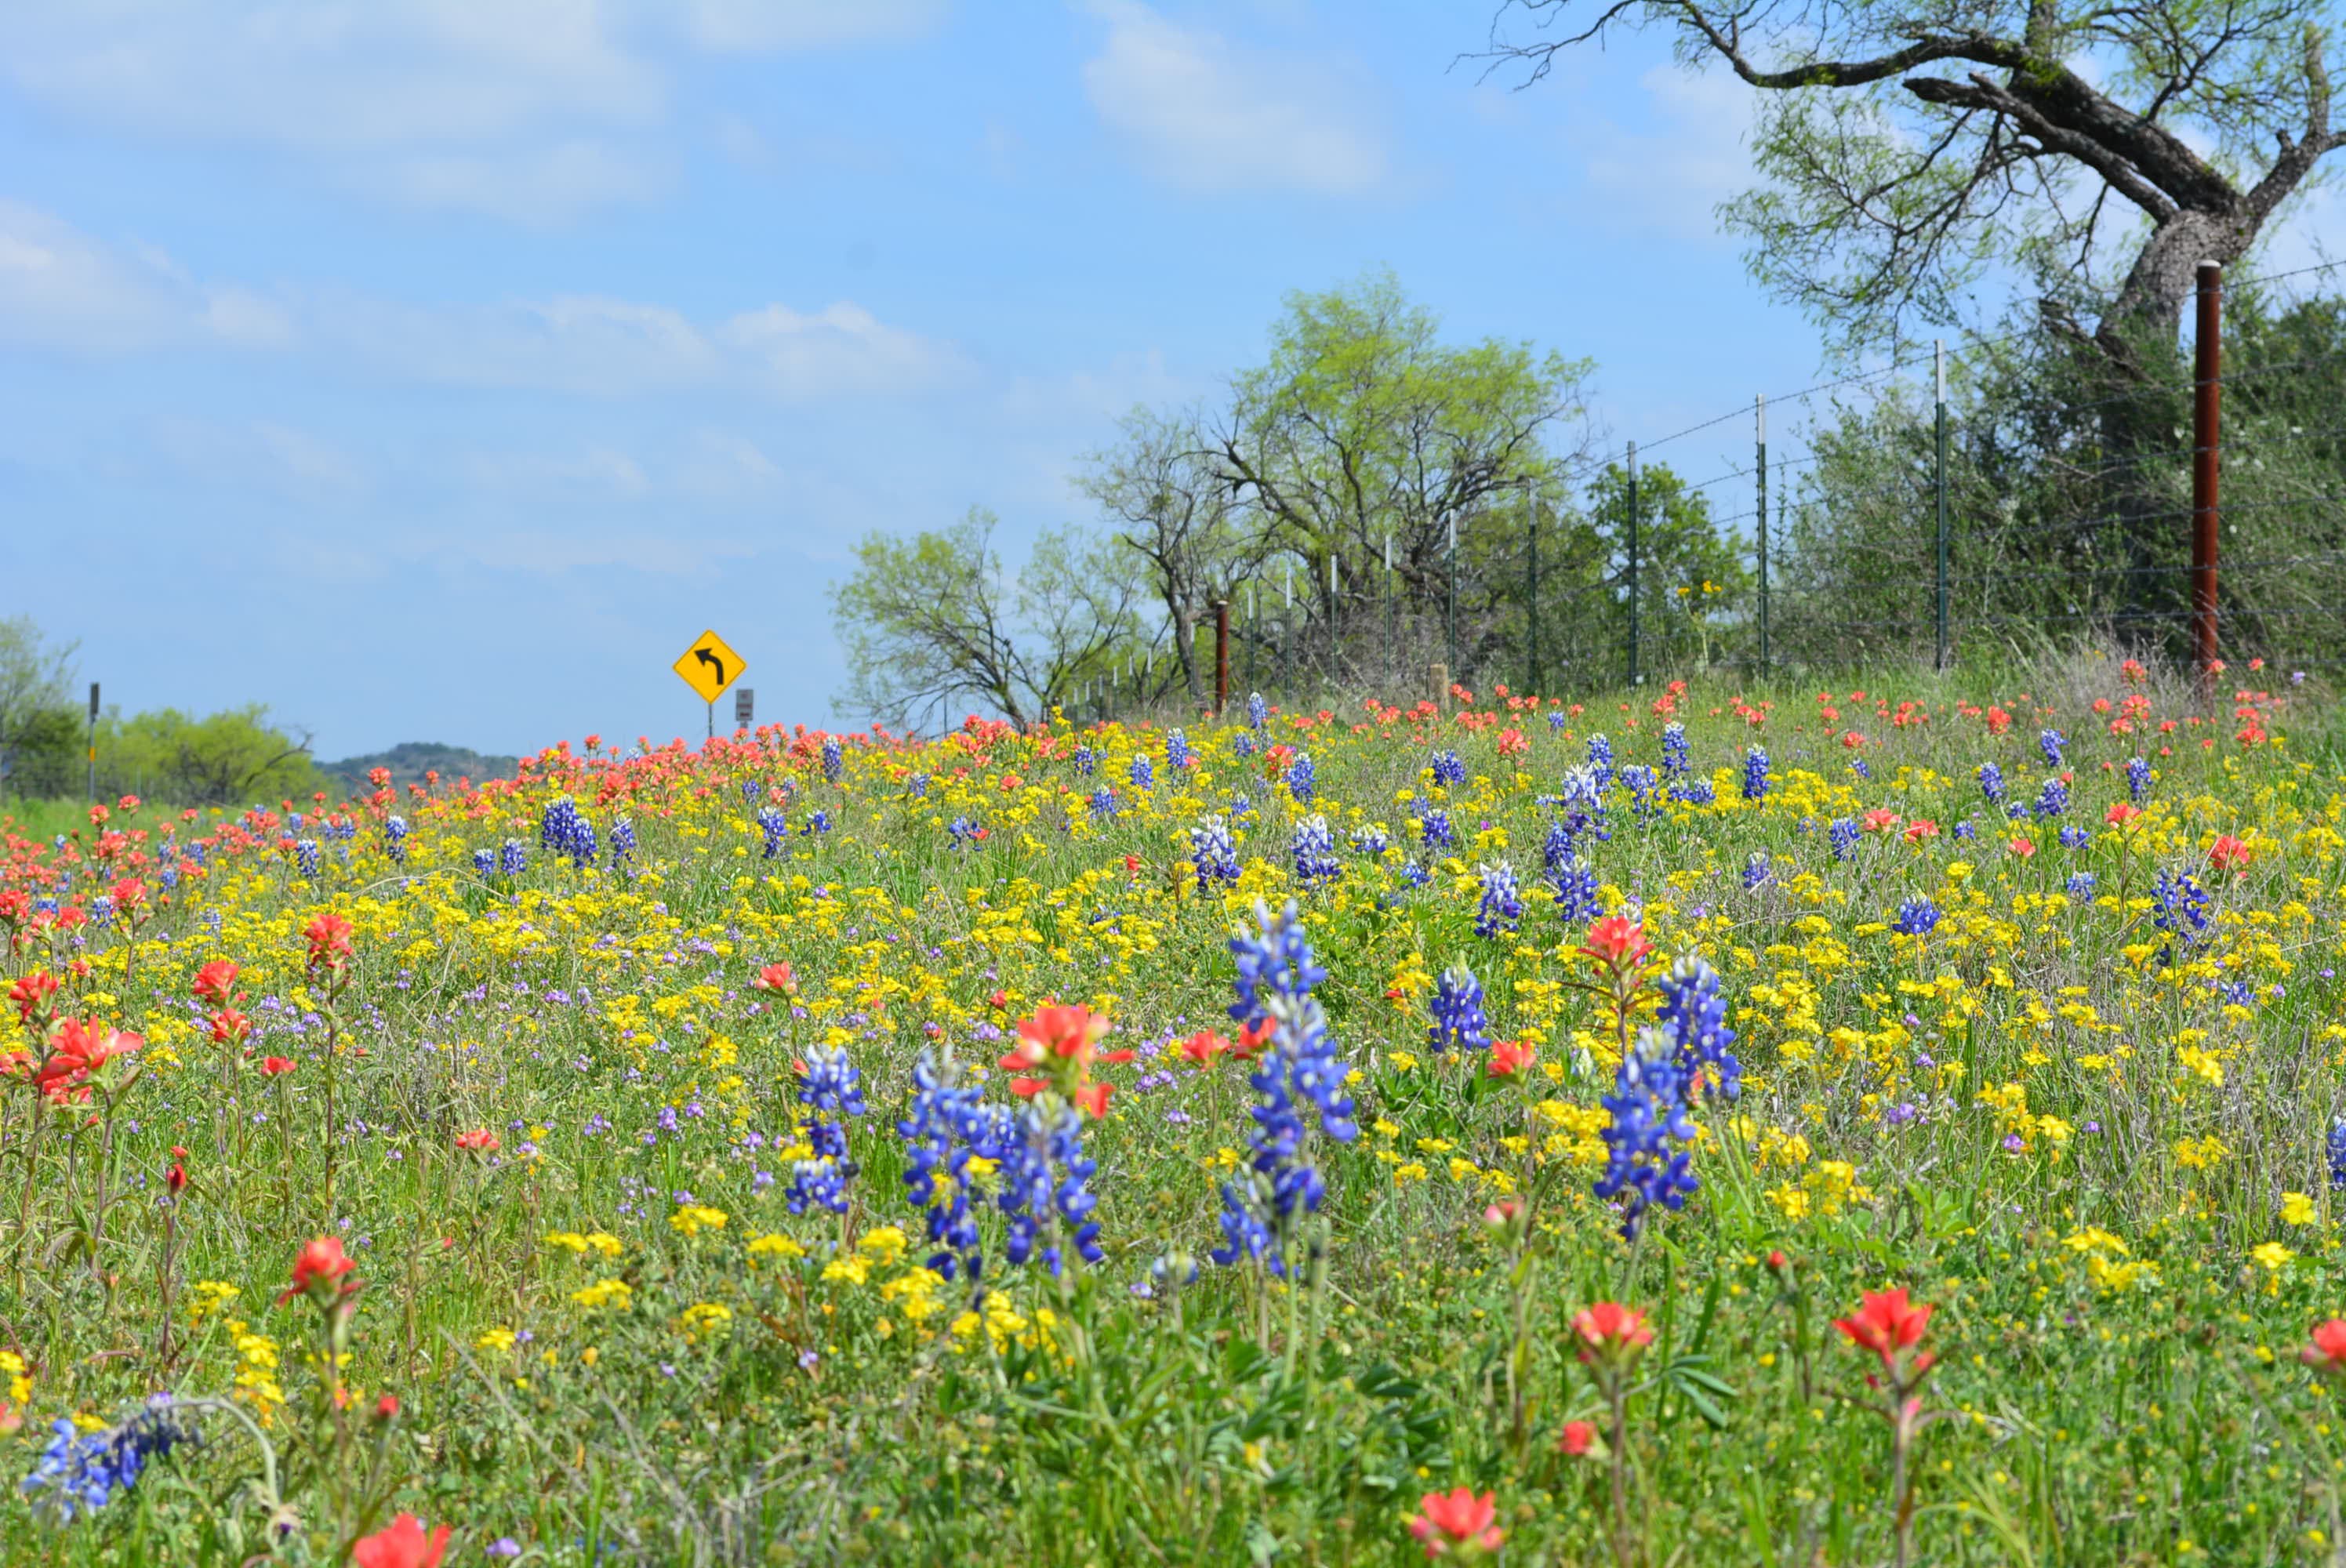 Where To Find Wildflowers? Experts Weigh In